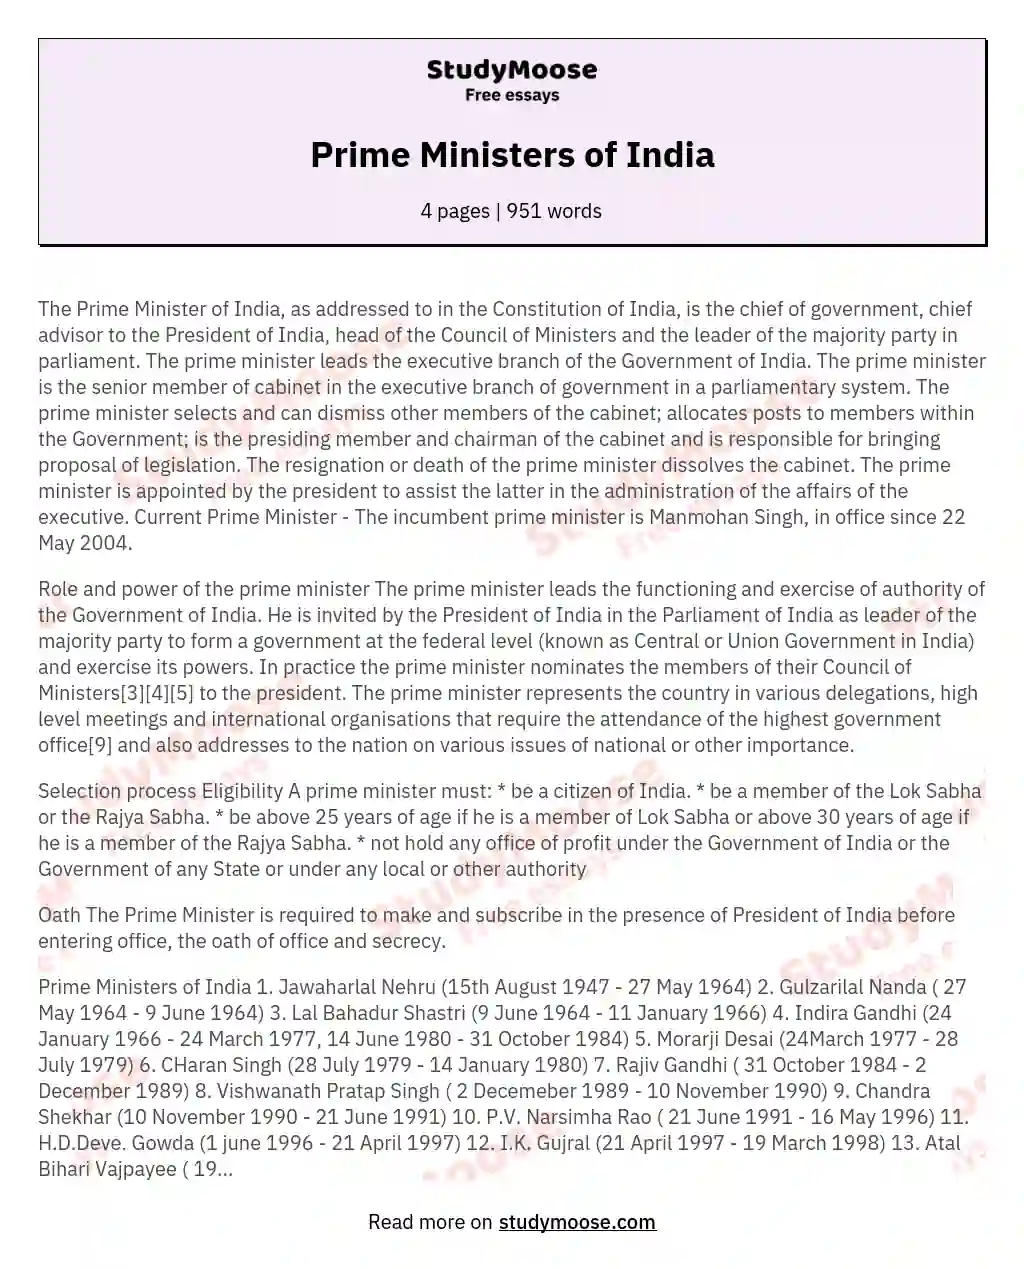 Prime Ministers of India essay